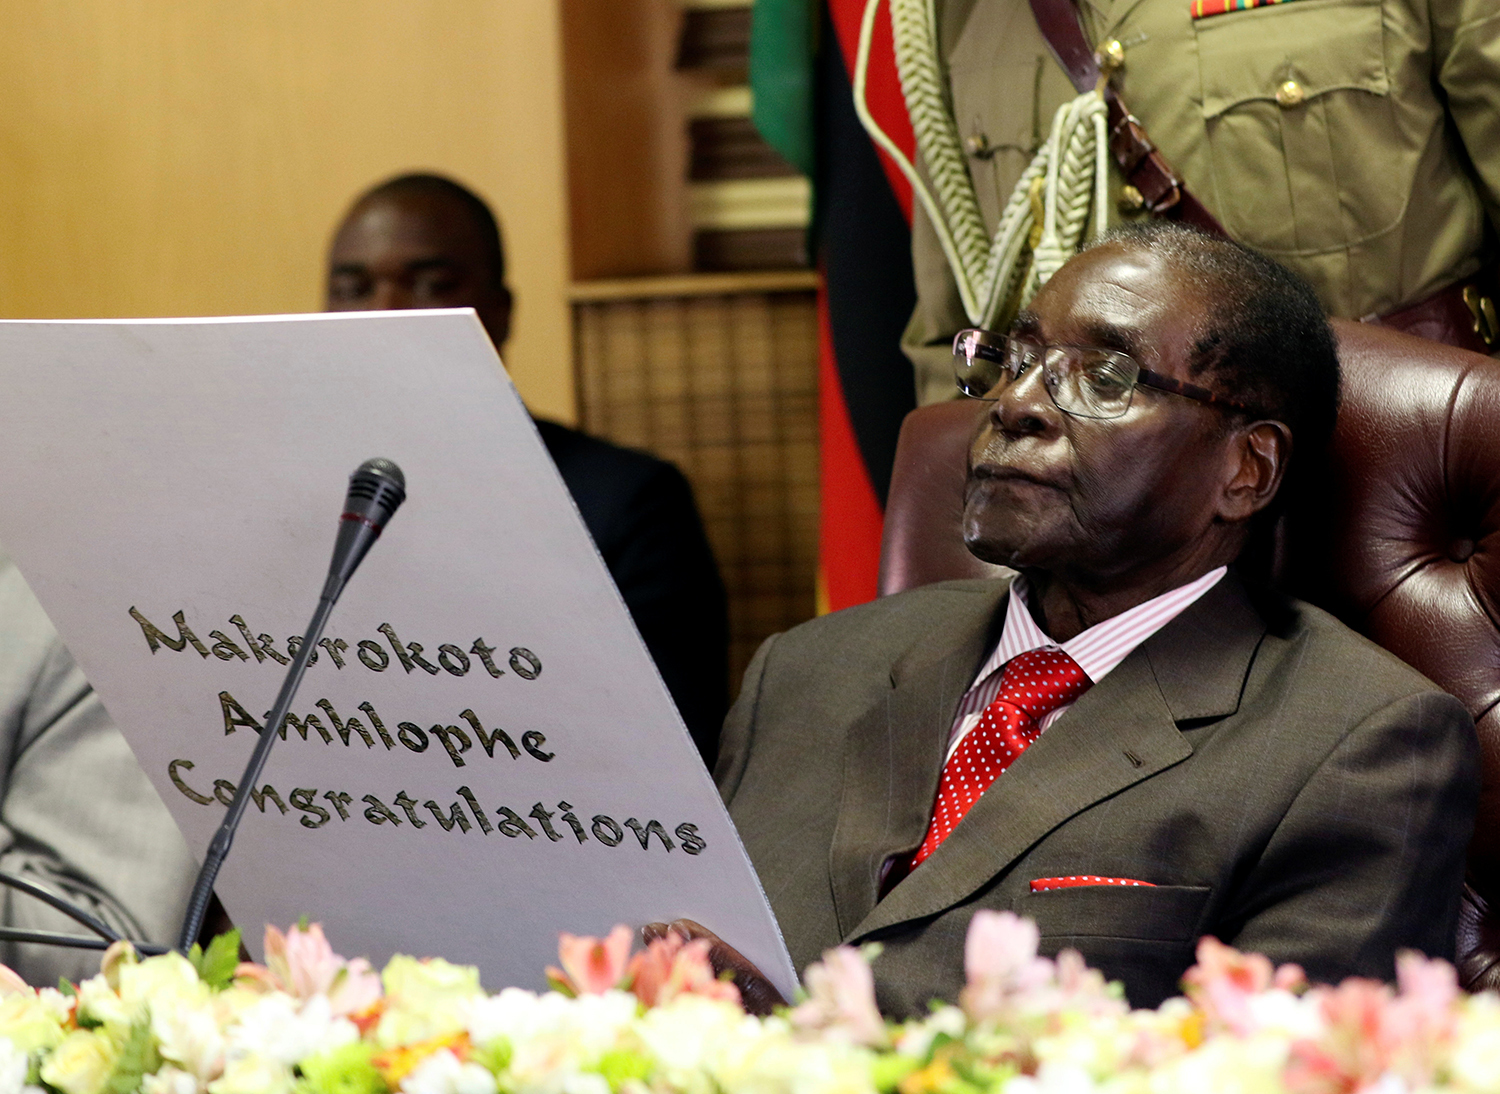 HARARE 2017-02-21 Zimbabwe's President Robert Mugabe reads a card during his 93rd birthday celebrations in Harare, Zimbabwe, February 21, 2017. REUTERS/Philimon Bulawayo TPX IMAGES OF THE DAY Photo: / REUTERS / TT / kod 72000